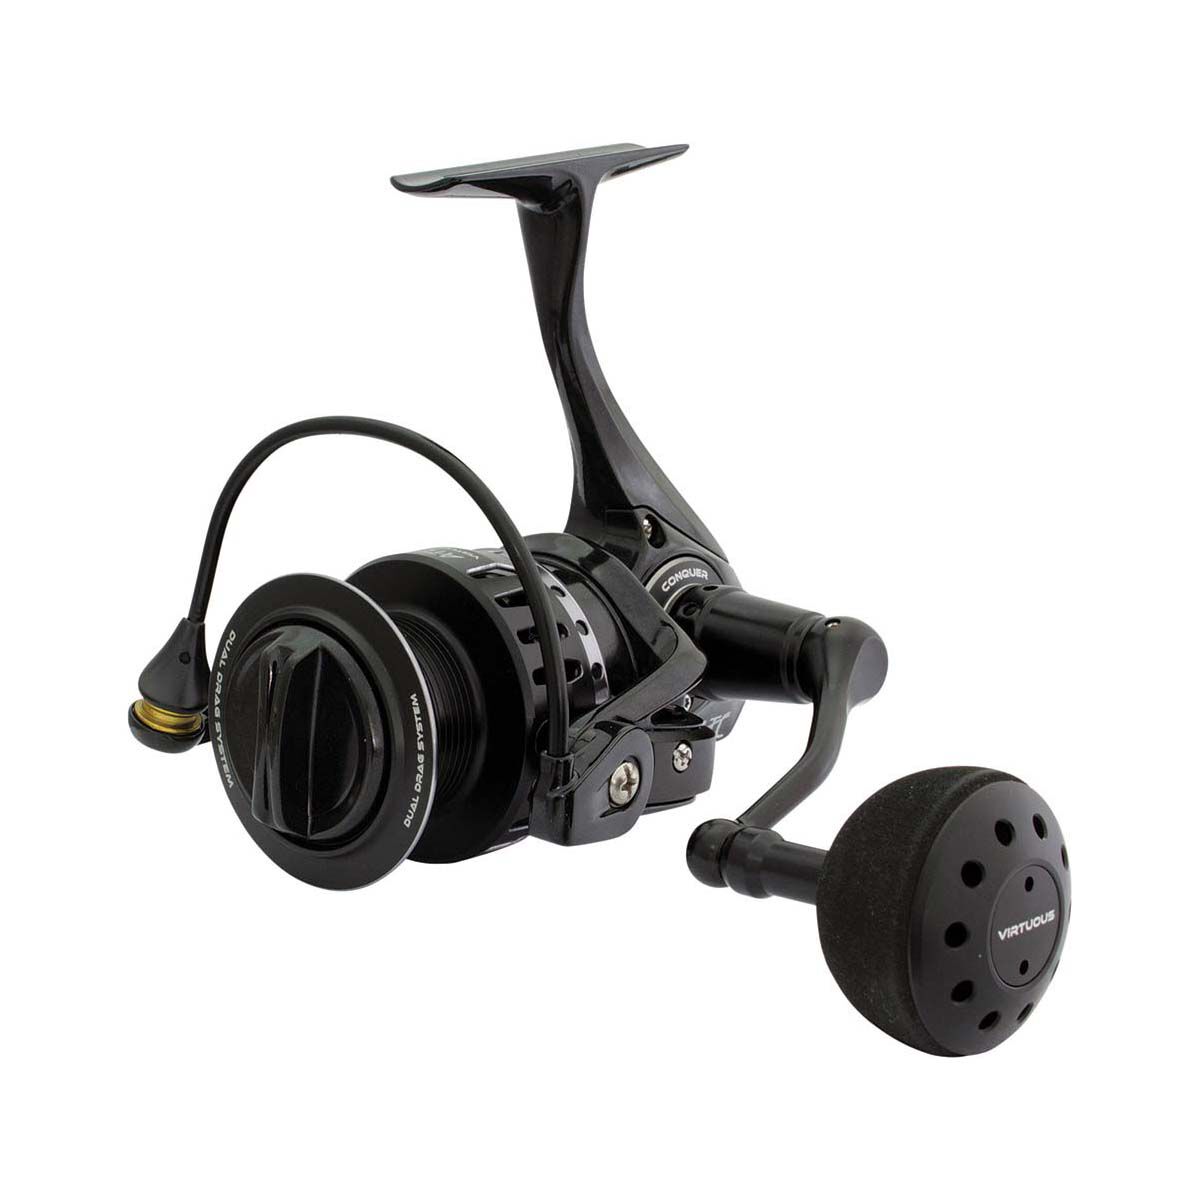 ATC Virtuous SW 10000 Spinning Reel